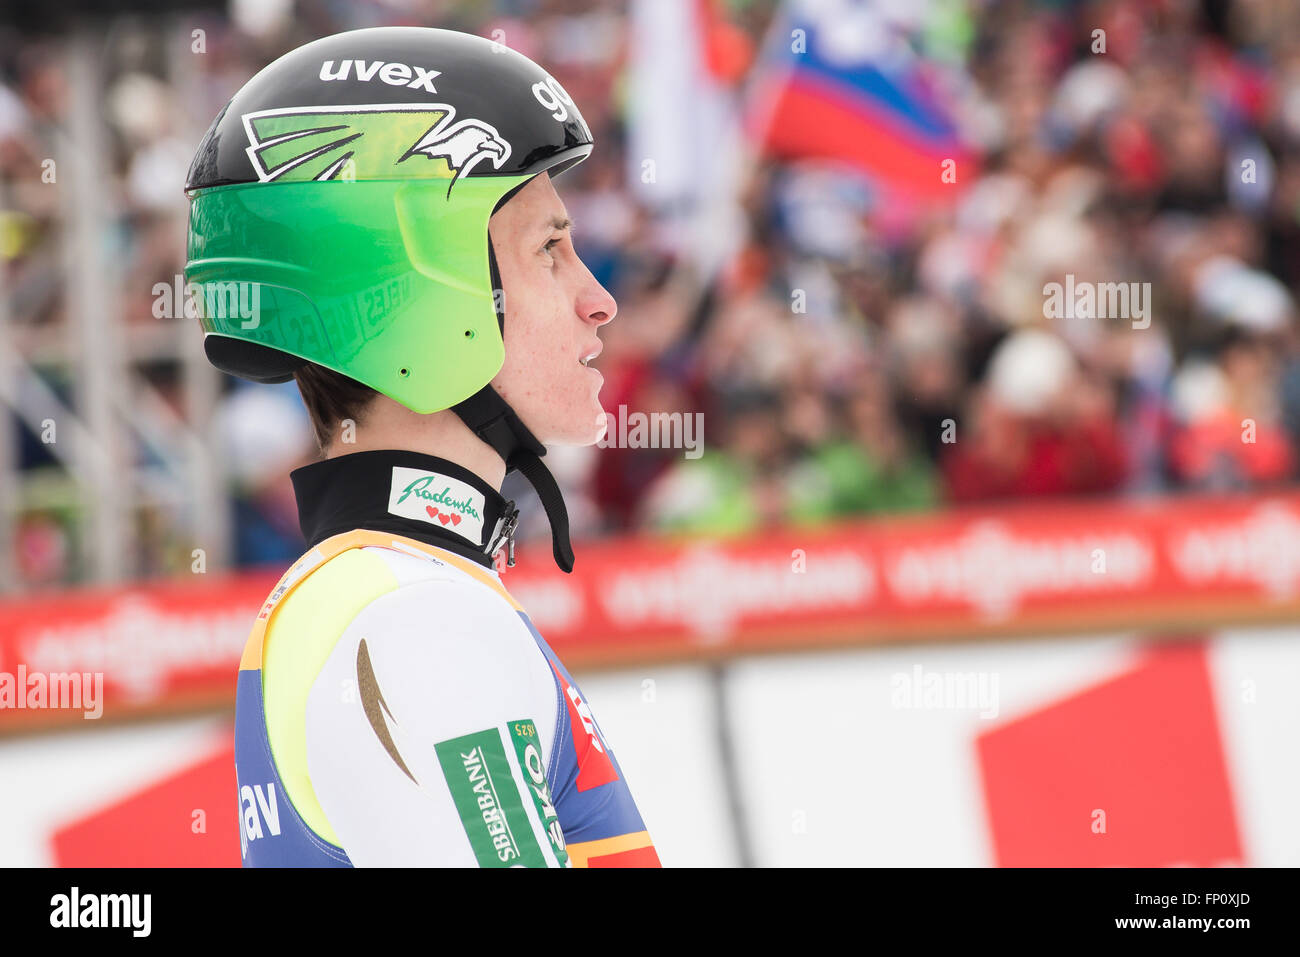 Planica, Slovenia. 17th Mar, 2016. Peter Prevc of Slovenia at the Planica FIS Ski Jumping World Cup final on the March 17, 2016 in Planica, Slovenia. © Rok Rakun/Pacific Press/Alamy Live News Stock Photo